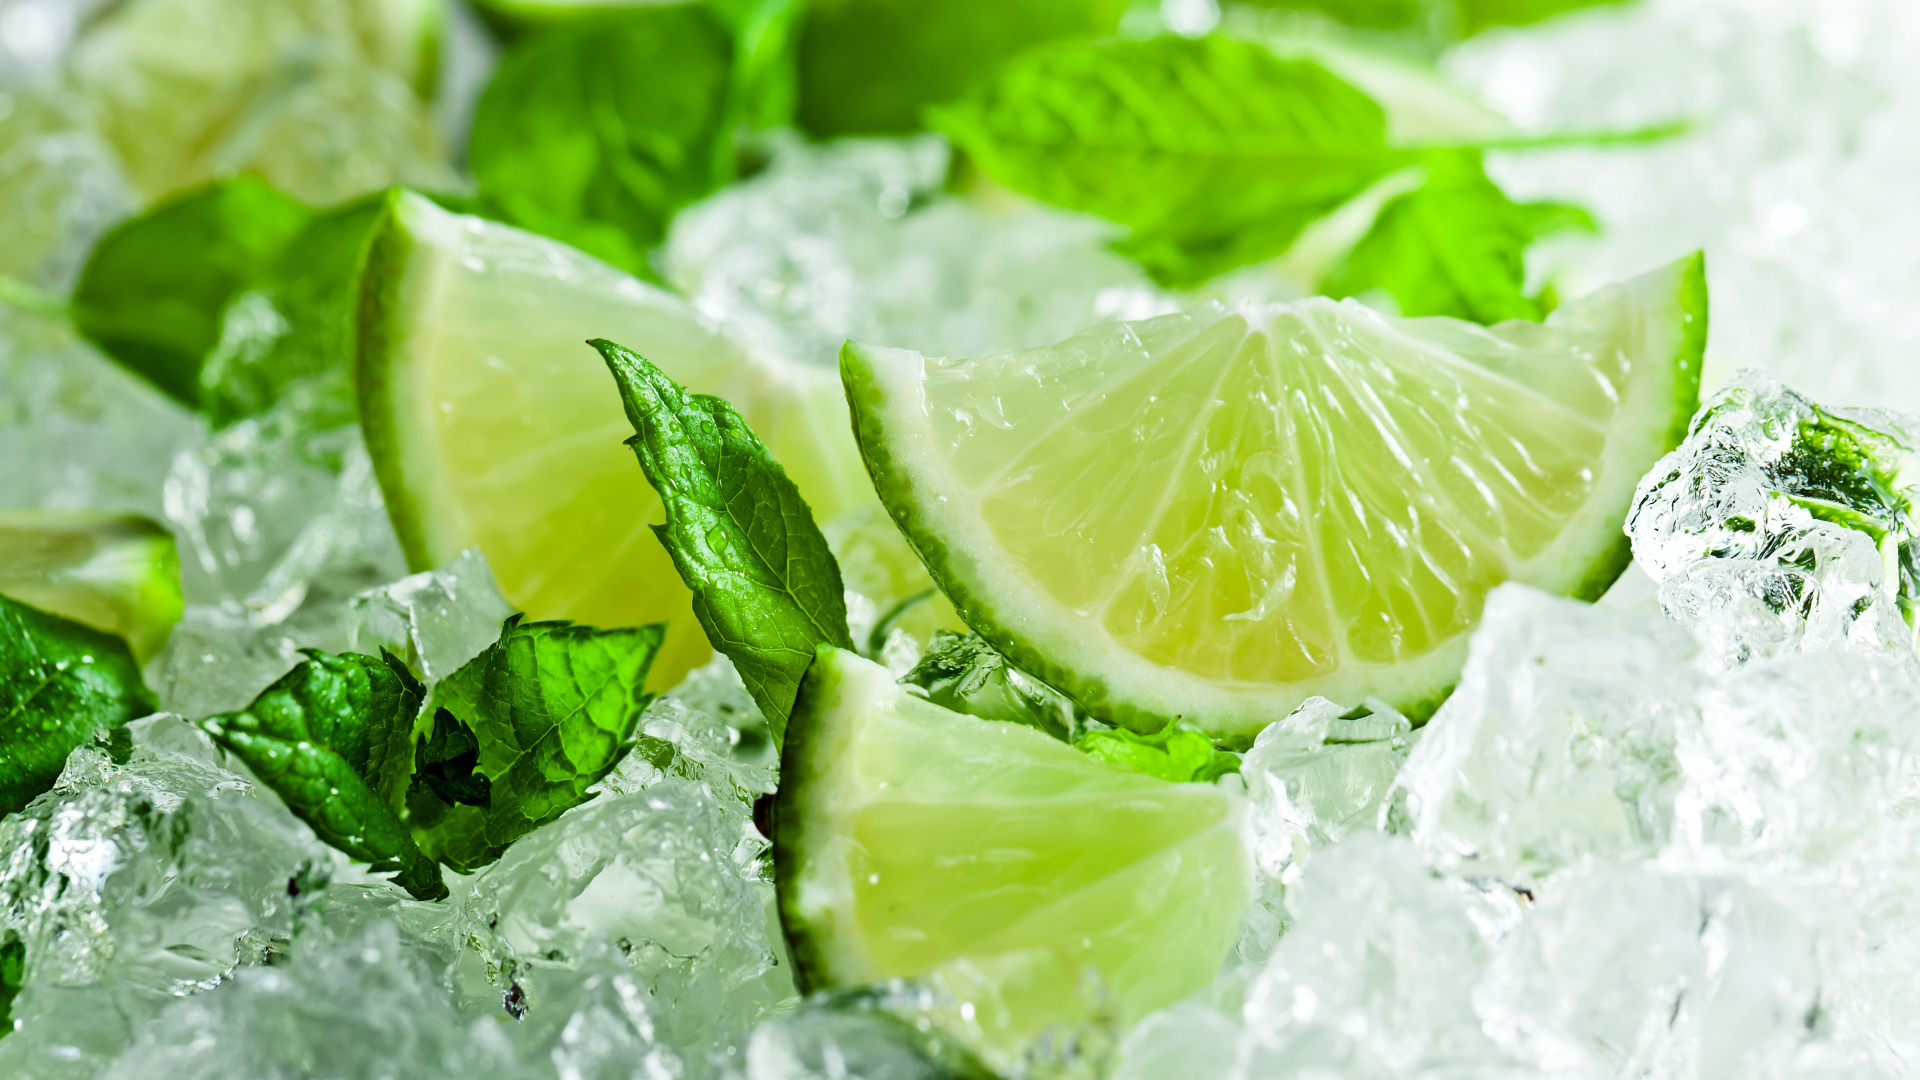 Pieces of fresh lime with mint leaves lie on ice